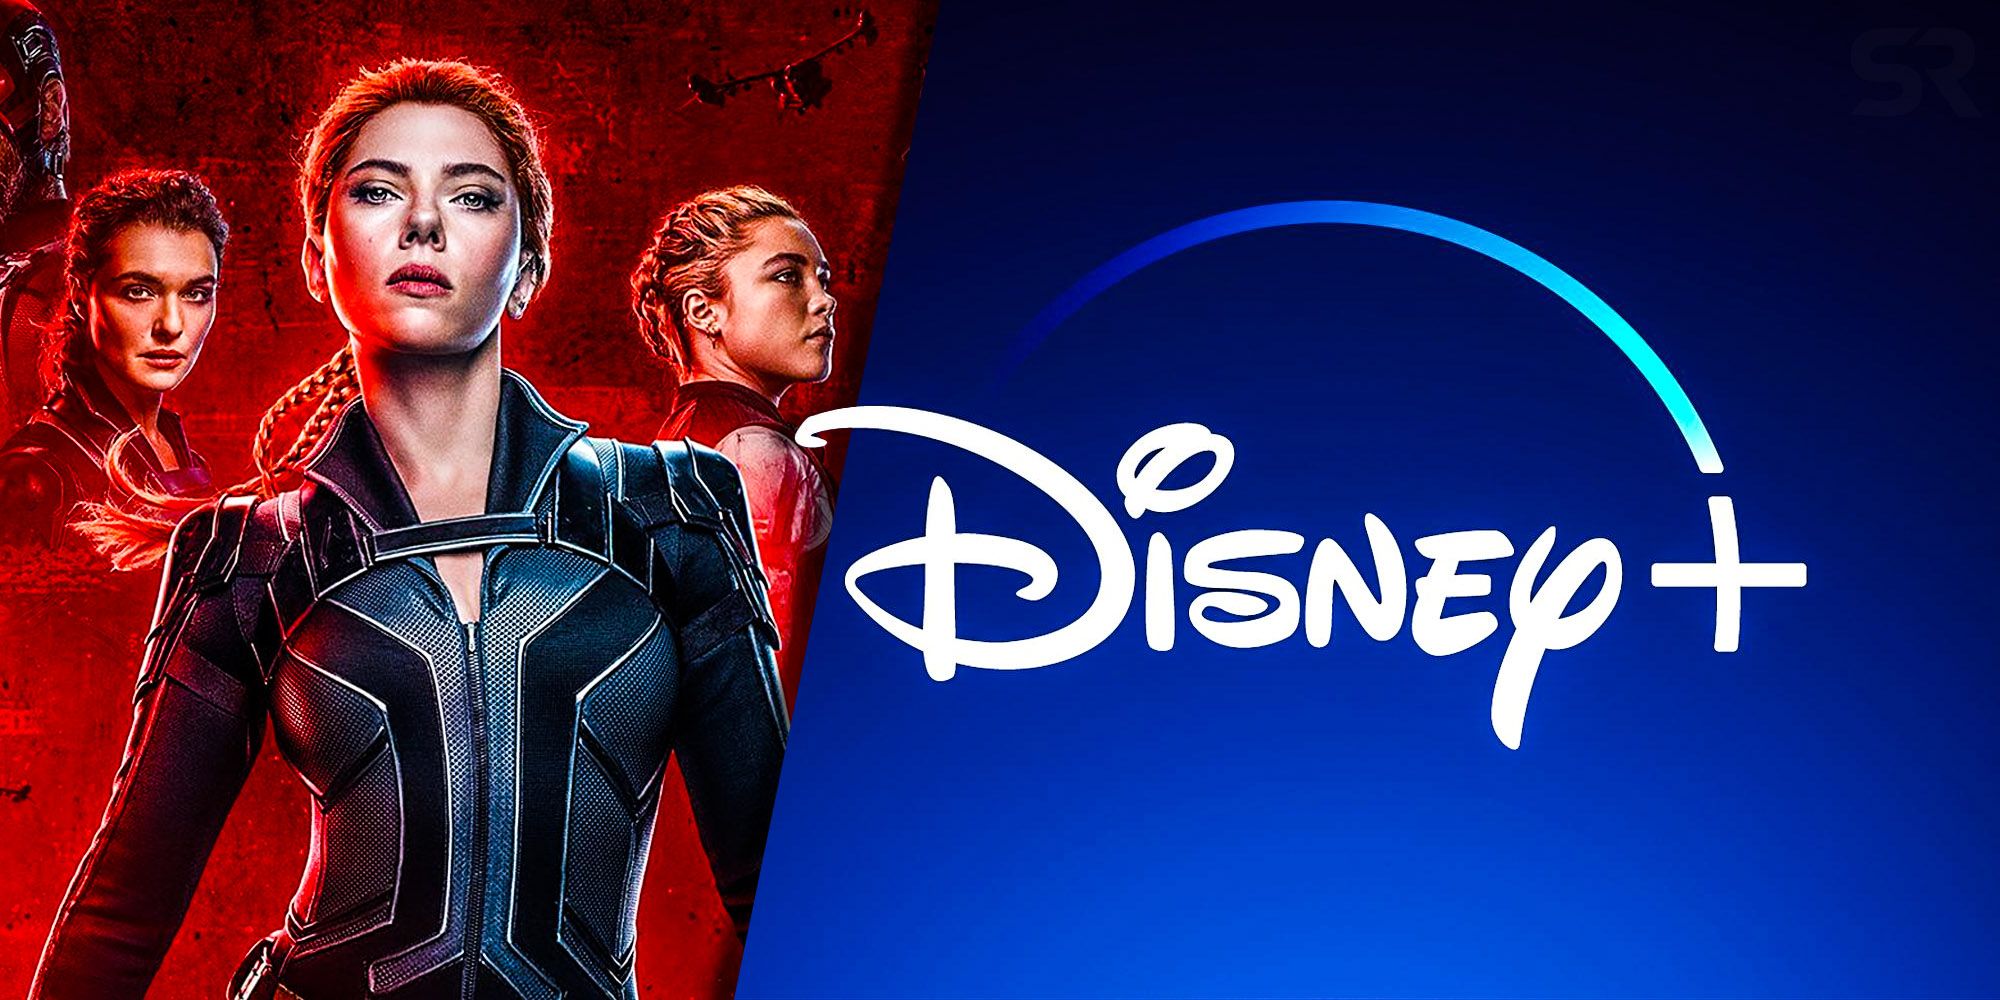 Split image showing a poster for Black Widow and the Disney+ logo